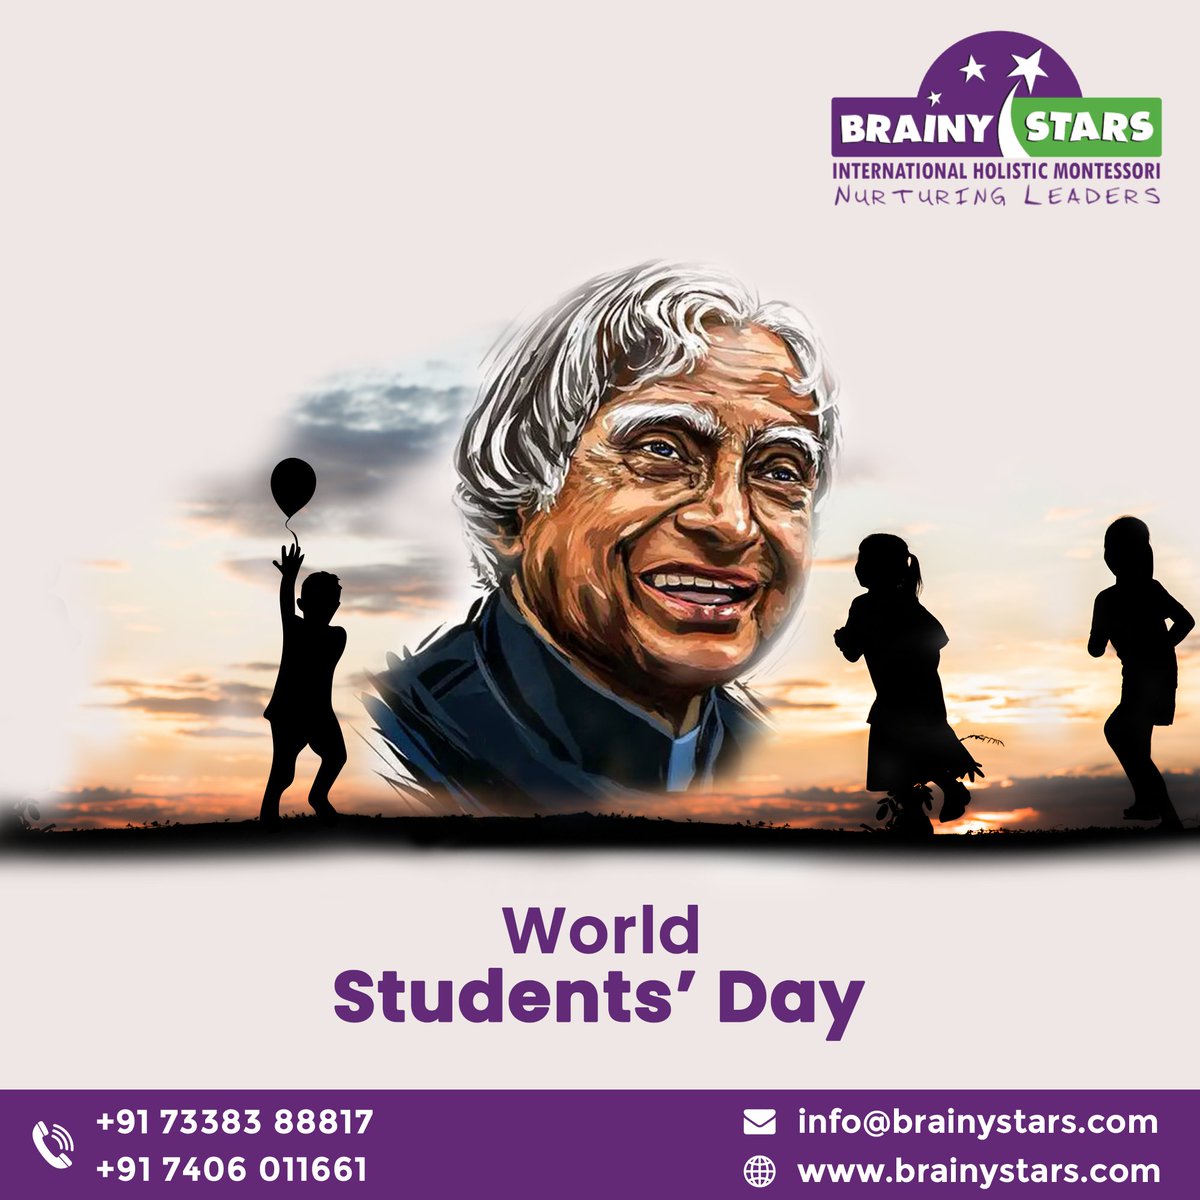 Embrace your past, be confident in your present, and face your future fearlessly-A P J Abdul Kalam

#Studentsday
#EmbraceYourPast
#ConfidentPresent
#FearlessFuture
#KalamWisdom
#InspirationQuotes